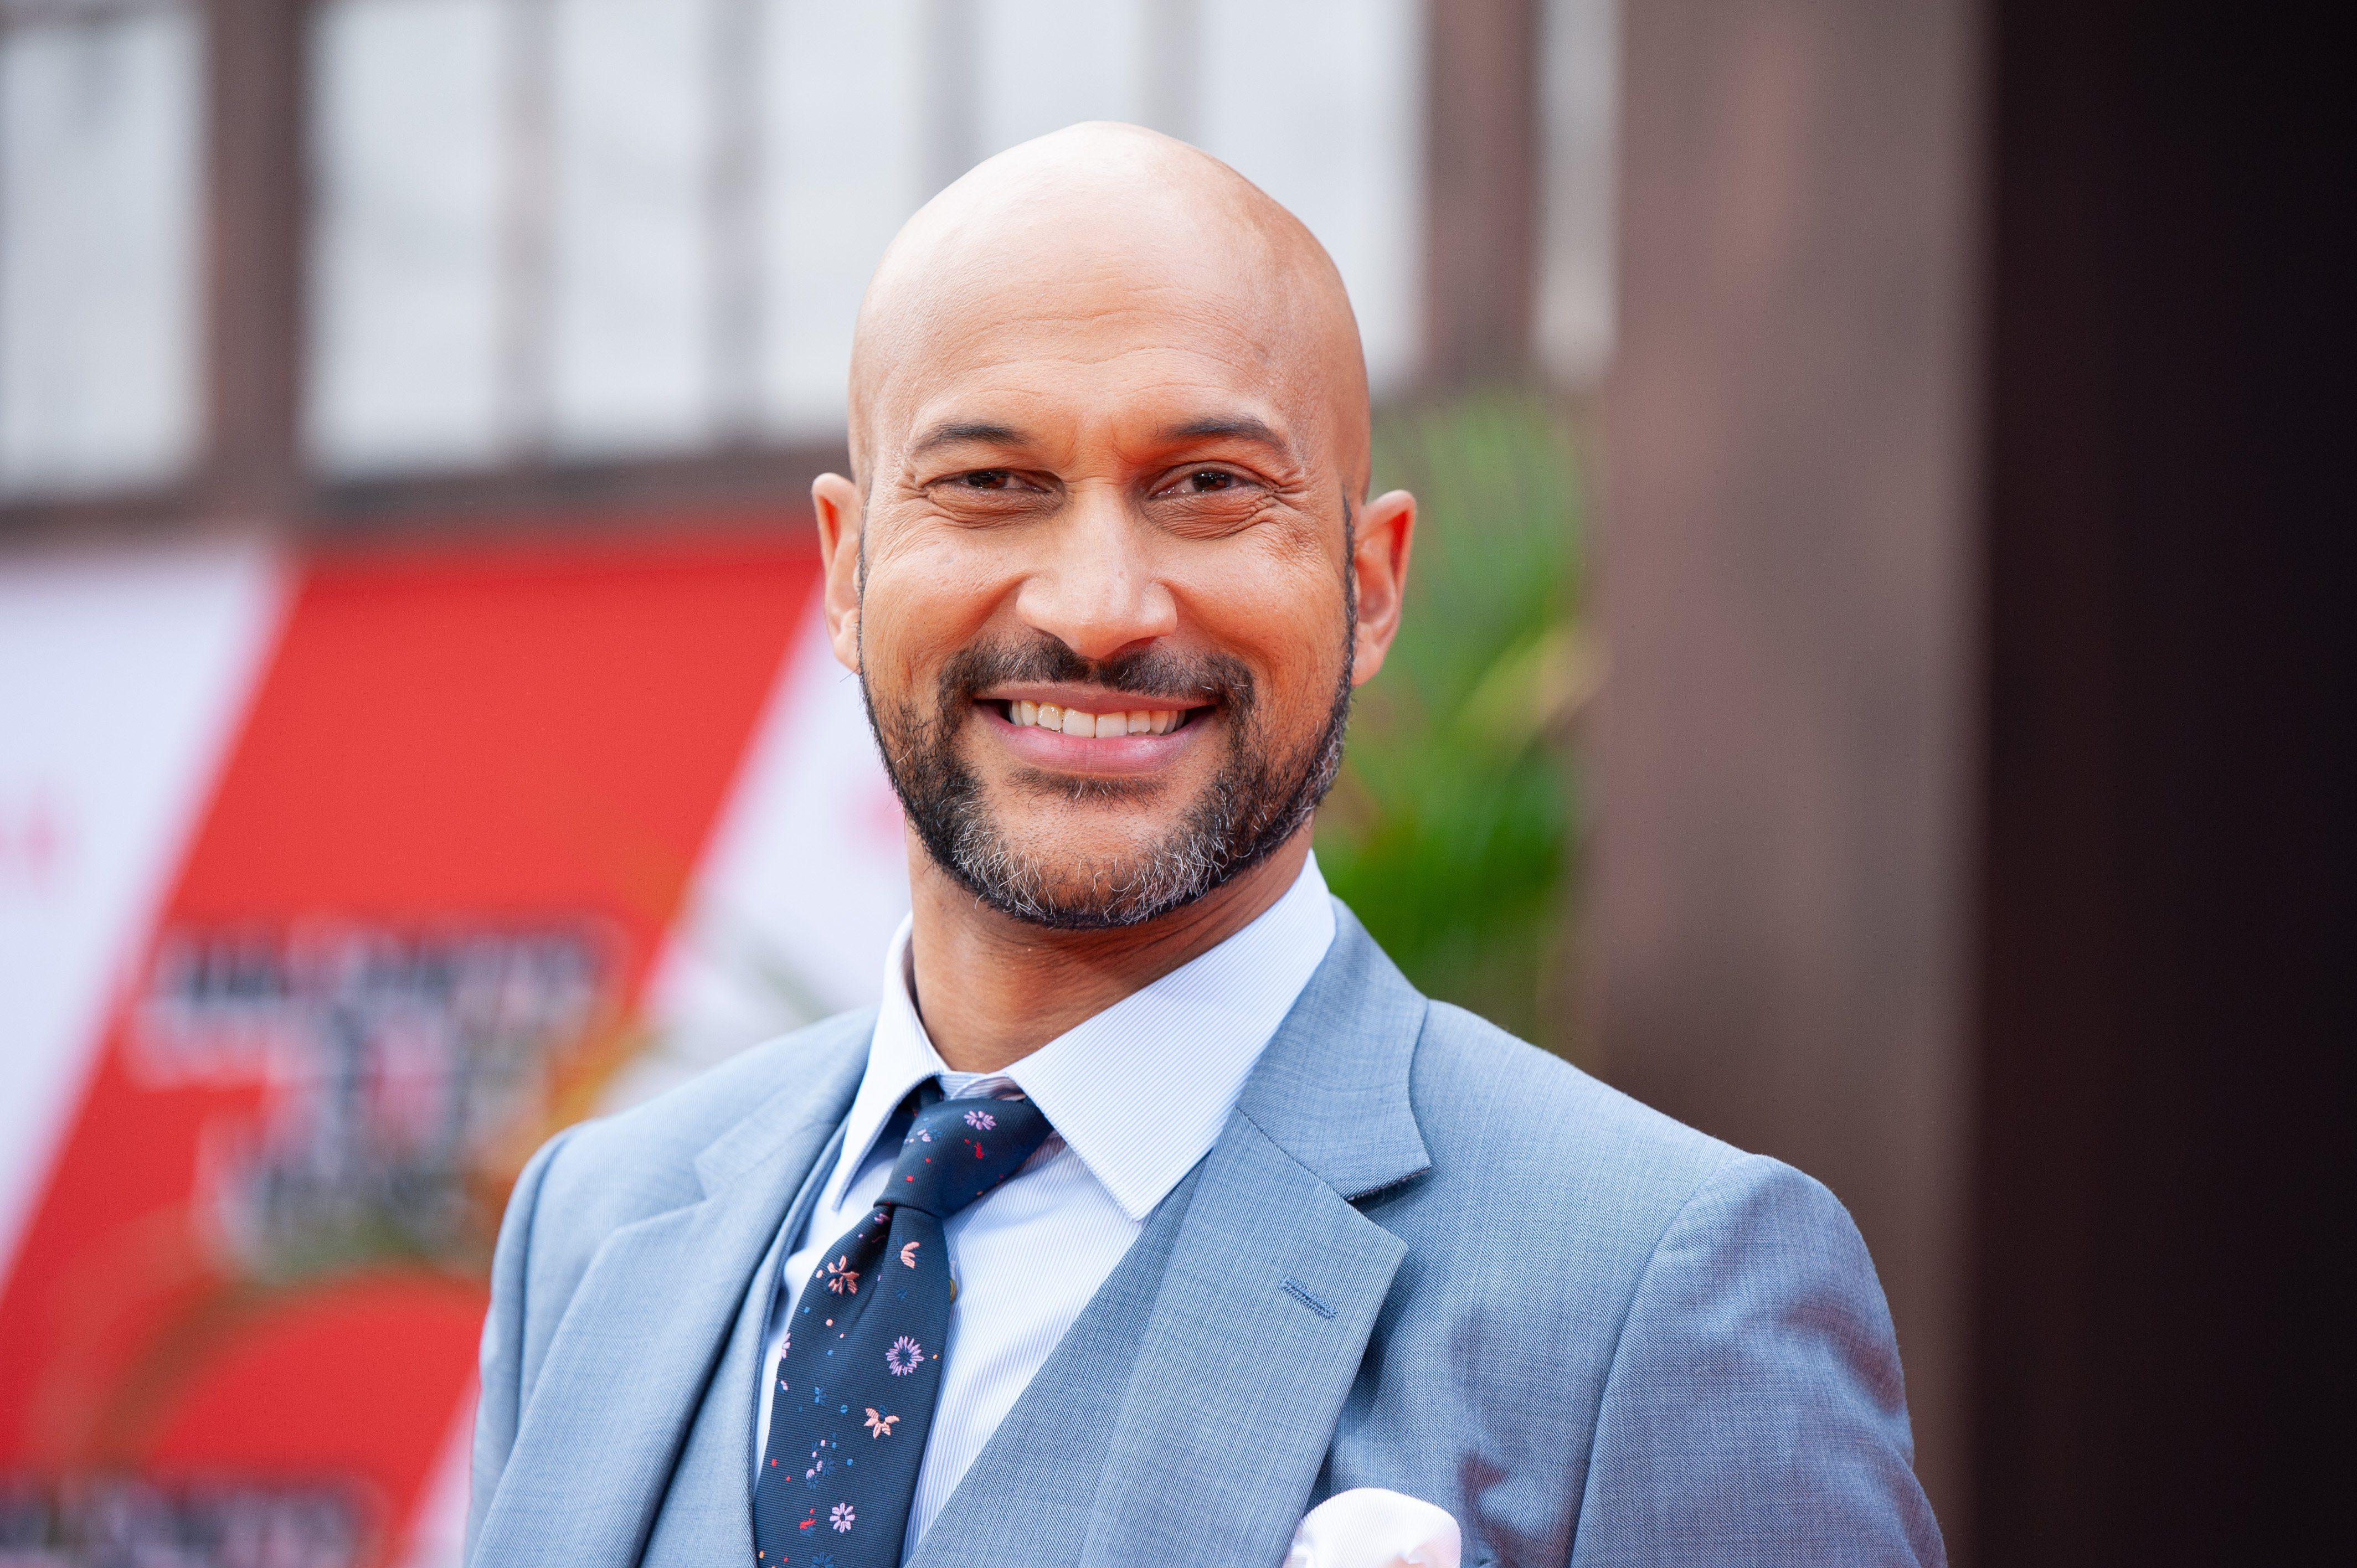 Mandatory Credit: Photo by CHRISTIAN MONTERROSA/EPA-EFE/Shutterstock (10429461o) Keegan-Michael Key poses on the red carpet during the premiere of the Netflix film Dolemite Is My Name at the Regency Village Theatre in Los Angeles, California, USA, 28 September 2019. Dolemite Is My Name Premiere in Los Angeles, USA - 28 Sep 2019